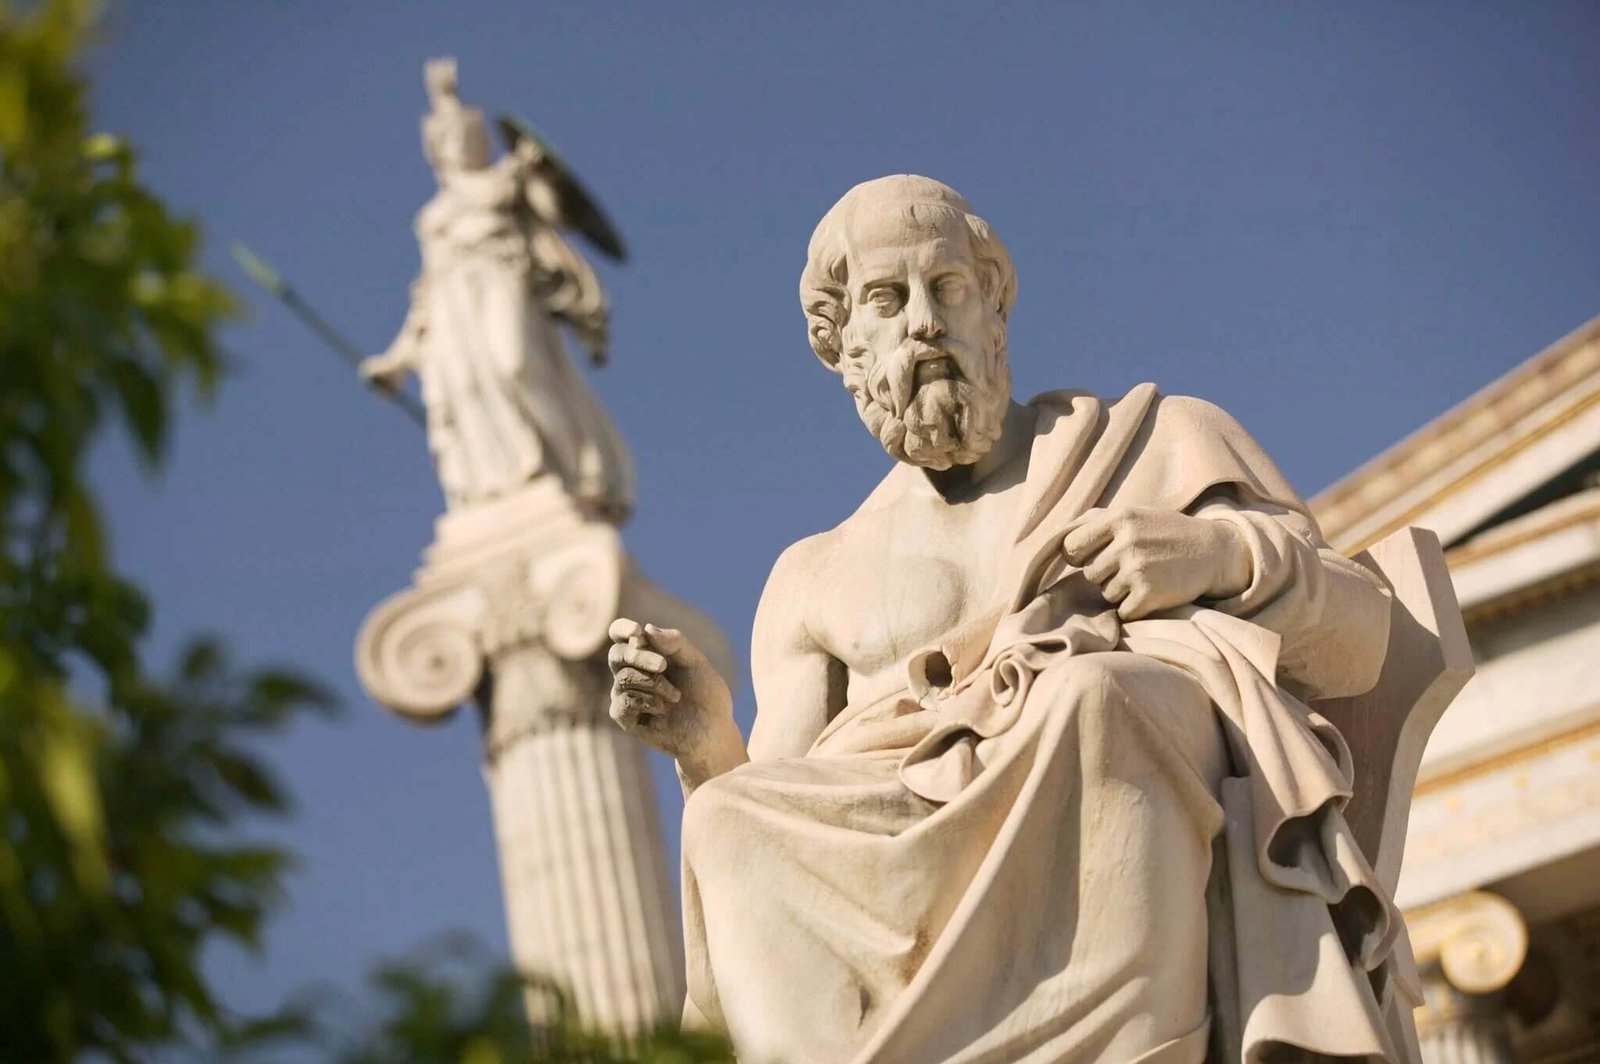 This statue represents Plato sitting in the forecourt to the entrance of the National Academy of Greece. The goddess Athena stands behind and above the philosopher.